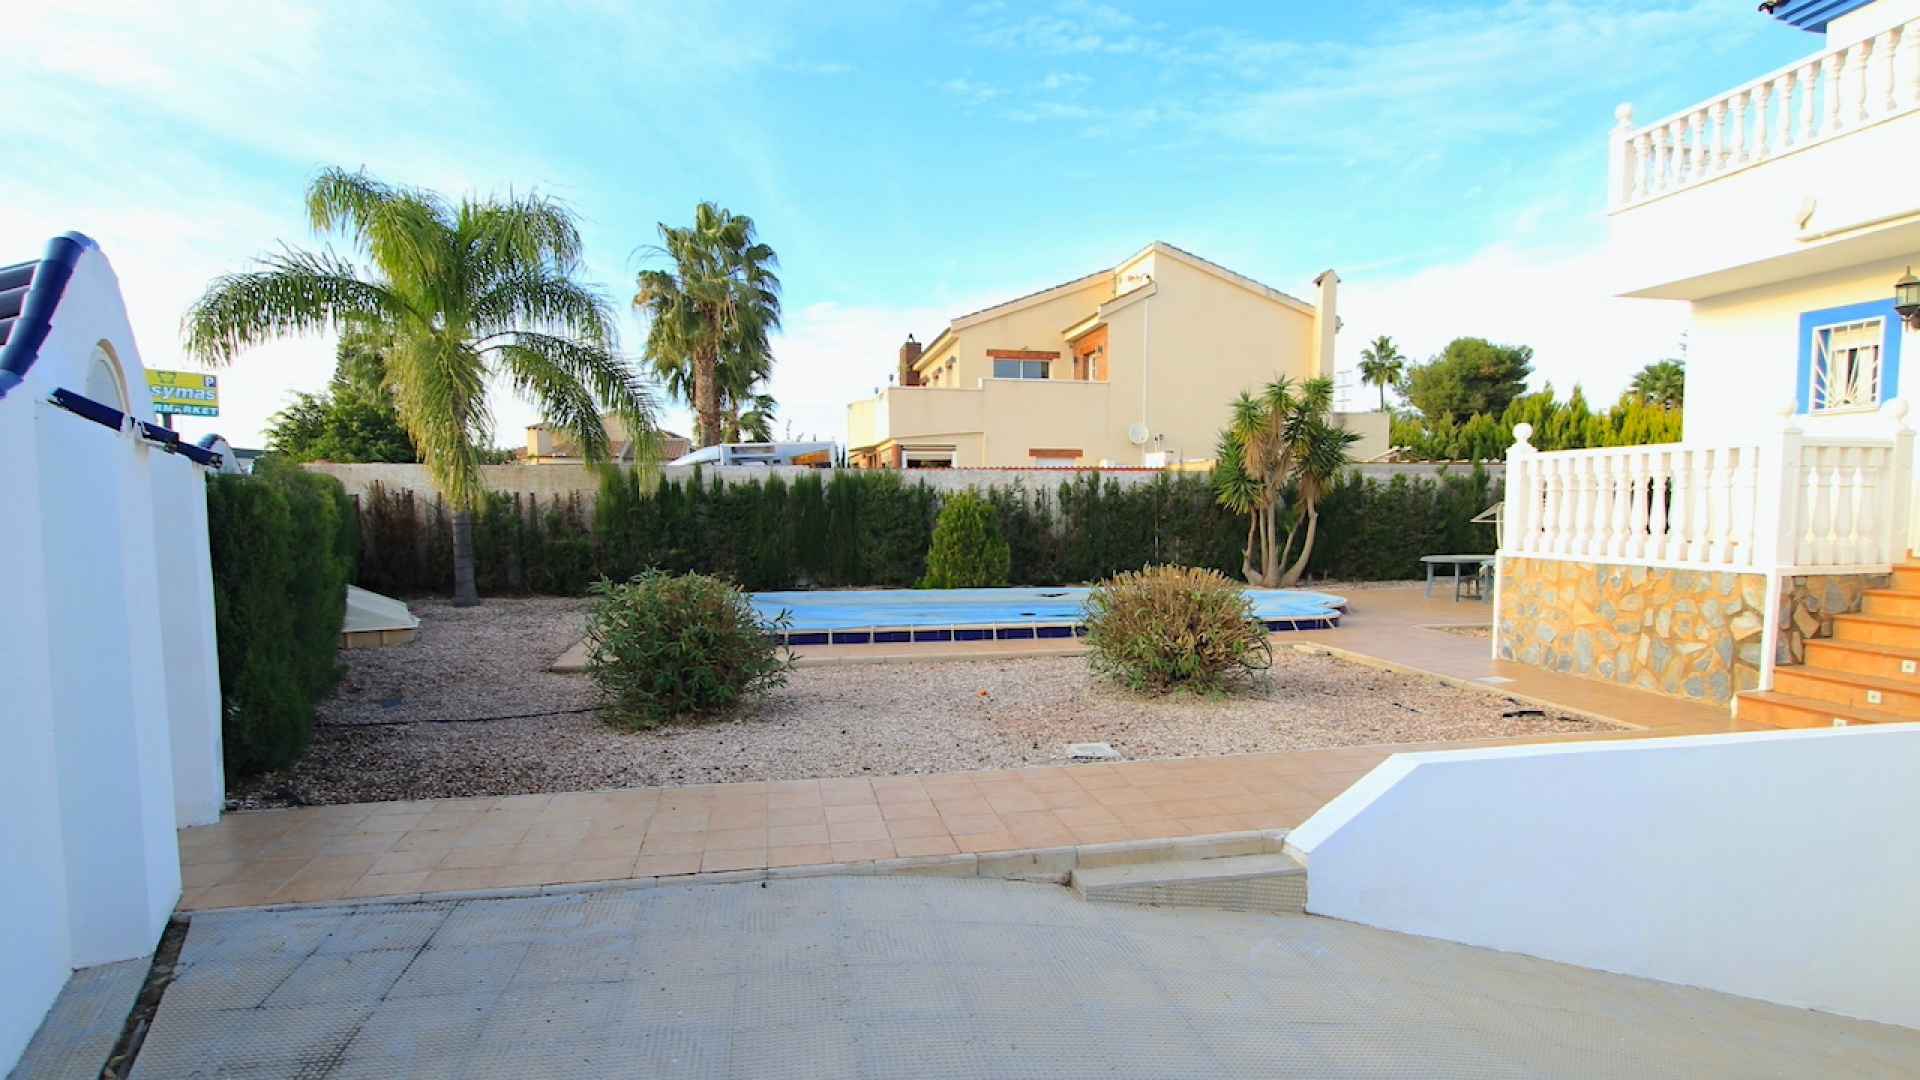 47910_fabulous_4_bedroom_villa_with_pool_central_quesada_131222115515_img_1883